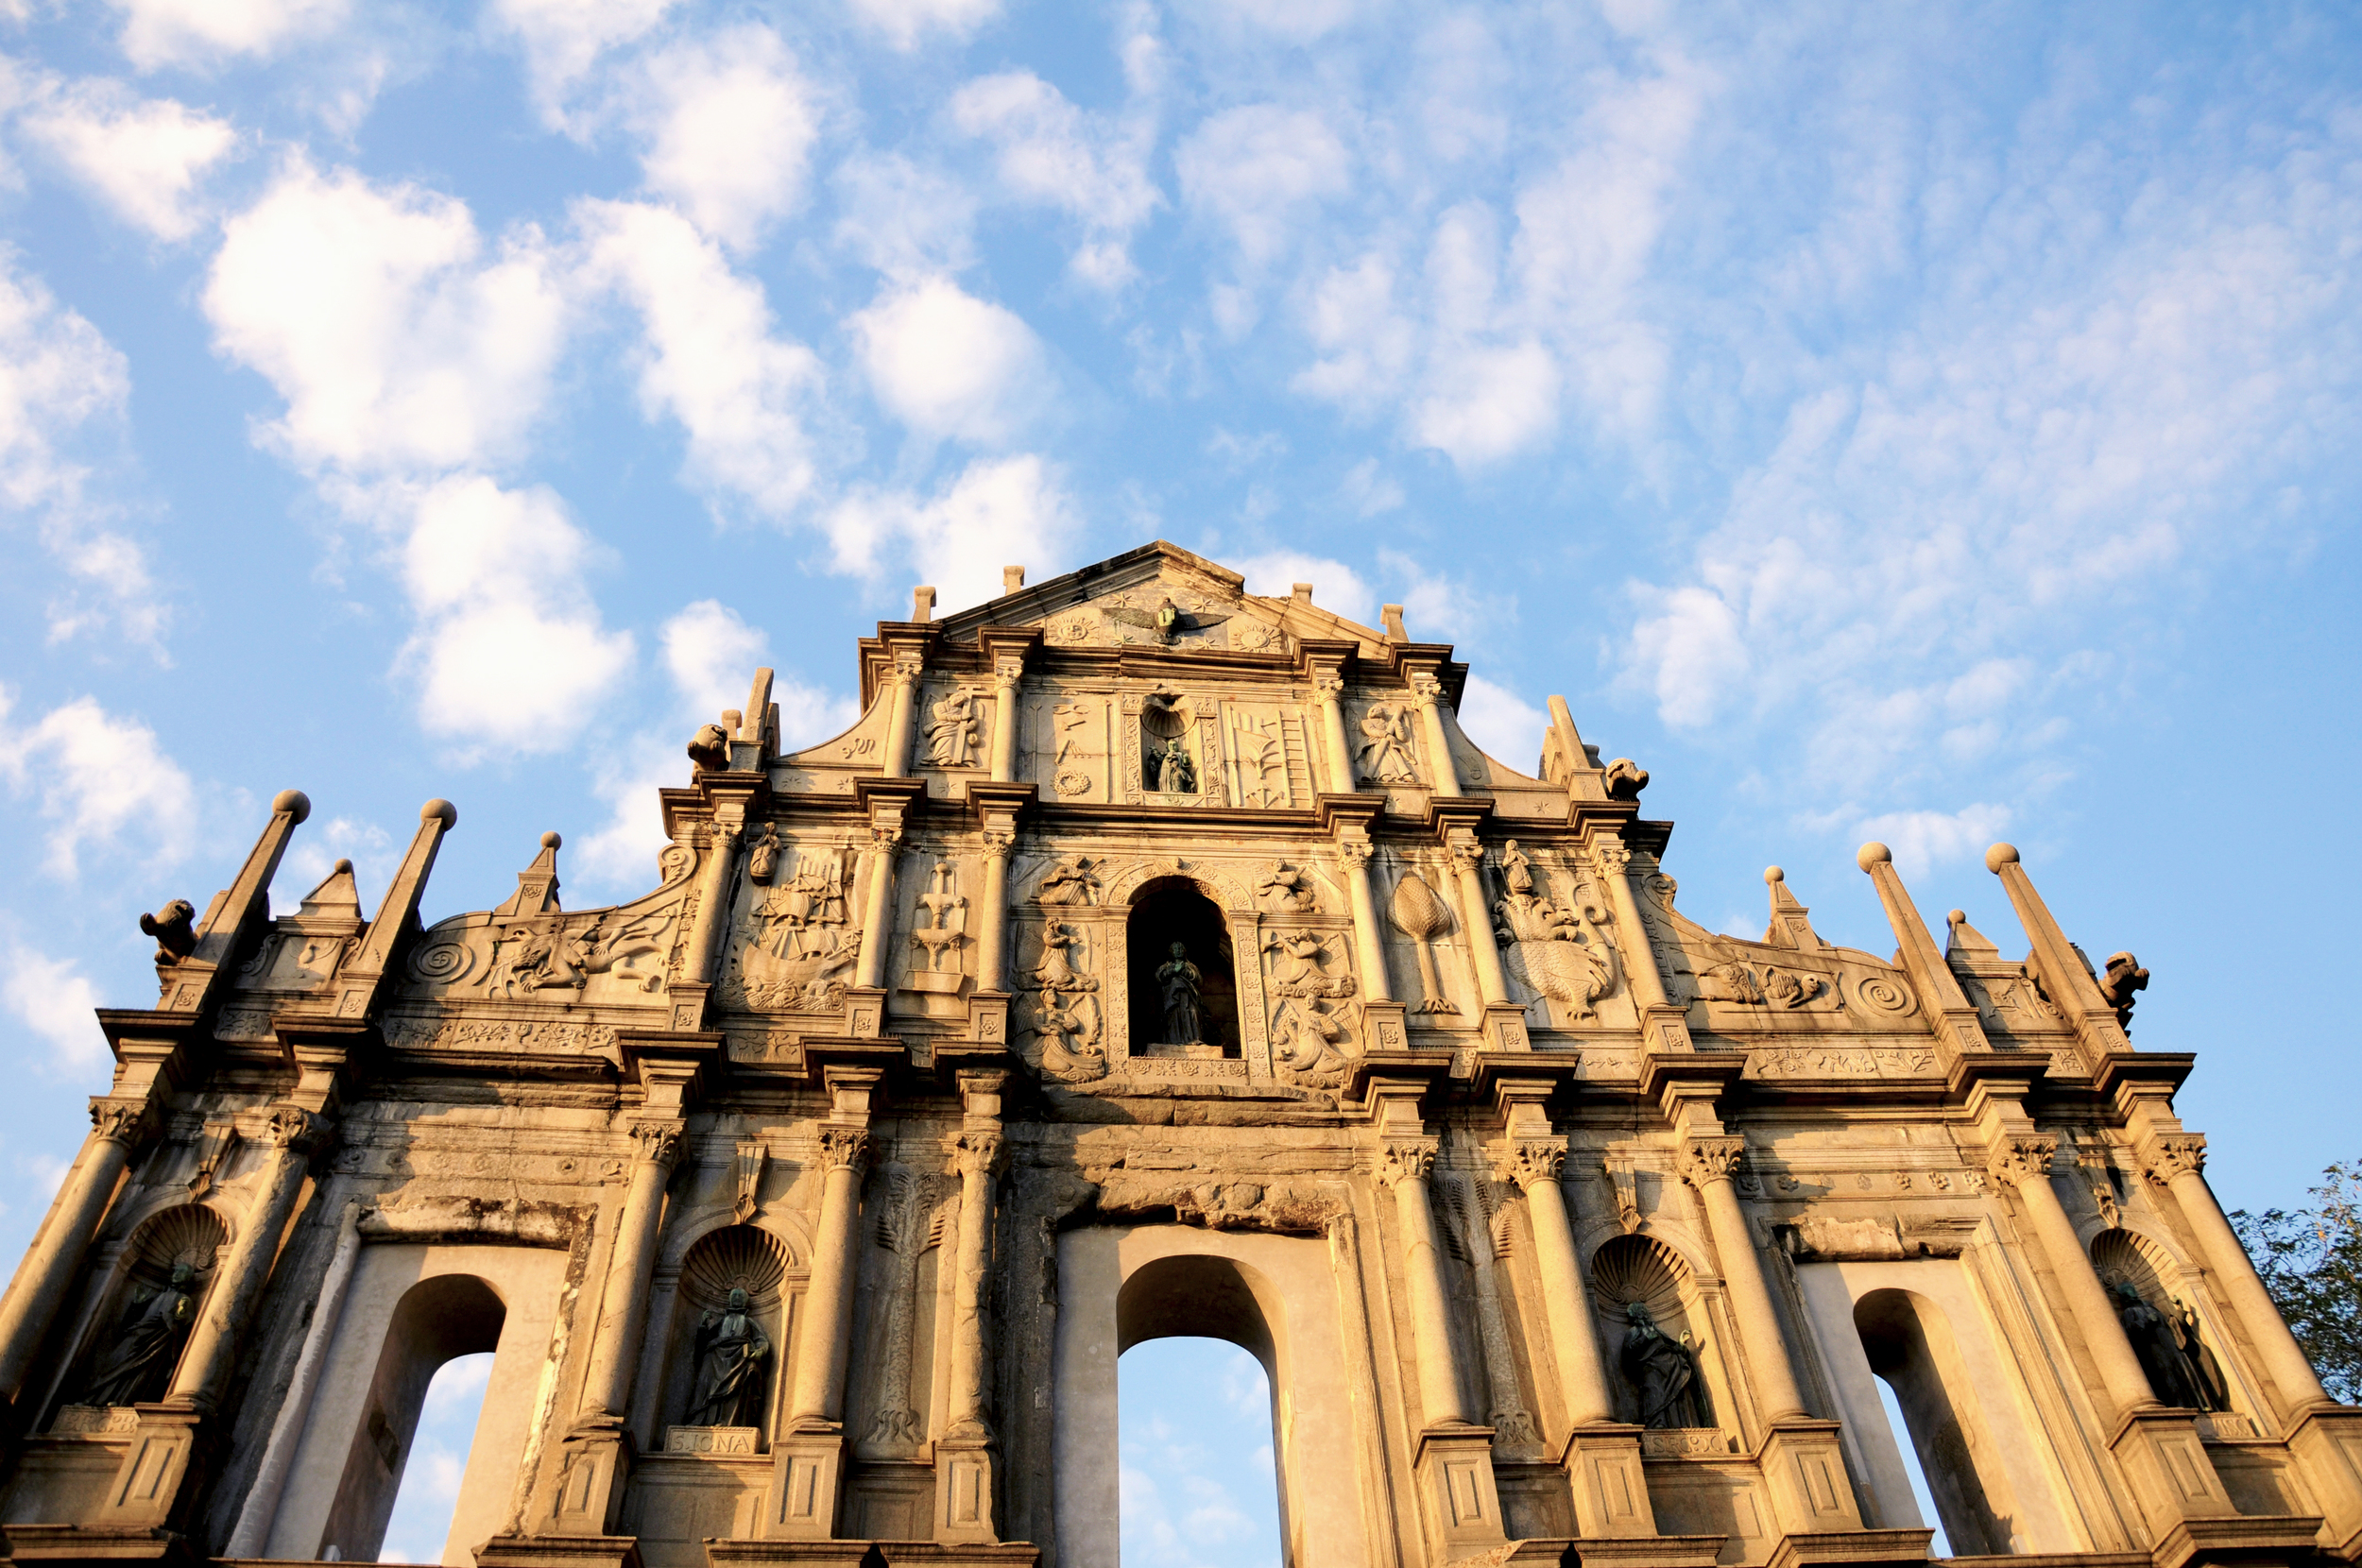  Ruin's of St. Paul's Catheral at Macau 